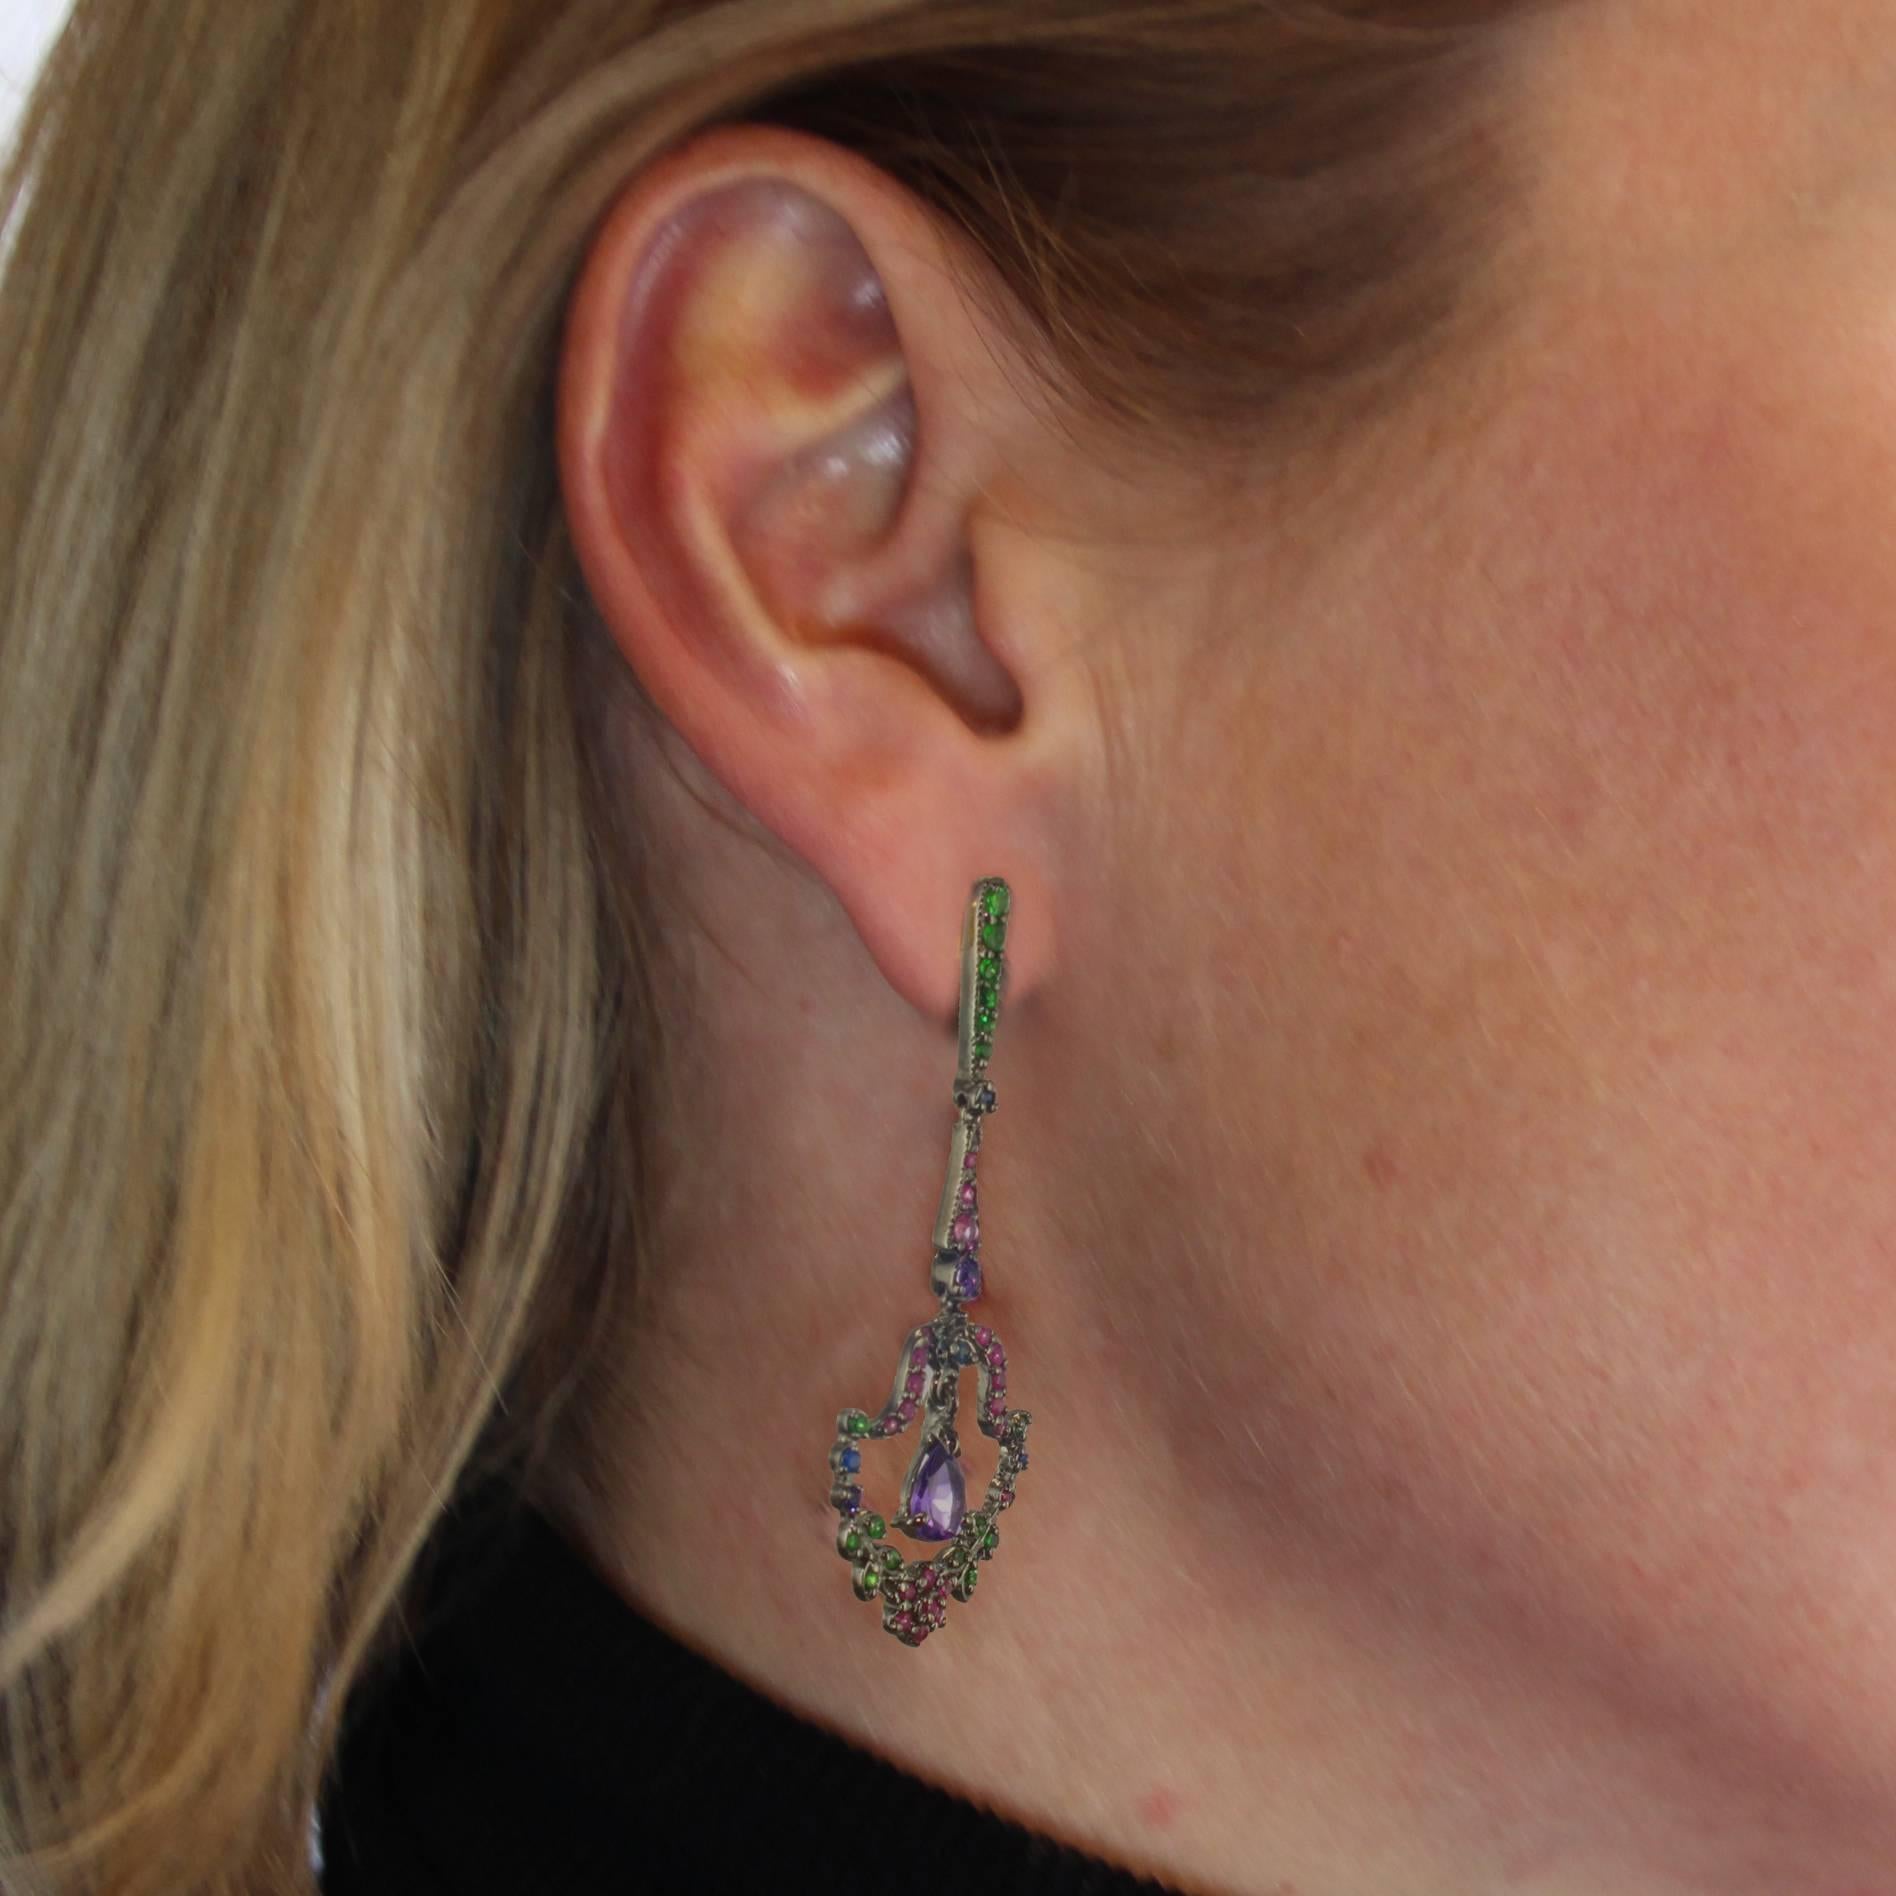 For pierced ears.
Earrings in silver with black rhodium and 18 carats yellow gold, for the stems and the clasps.
These lovely earrings are made of a line of tsavorite garnets that holds a line of pink sapphires, itself holding a lantern-shaped